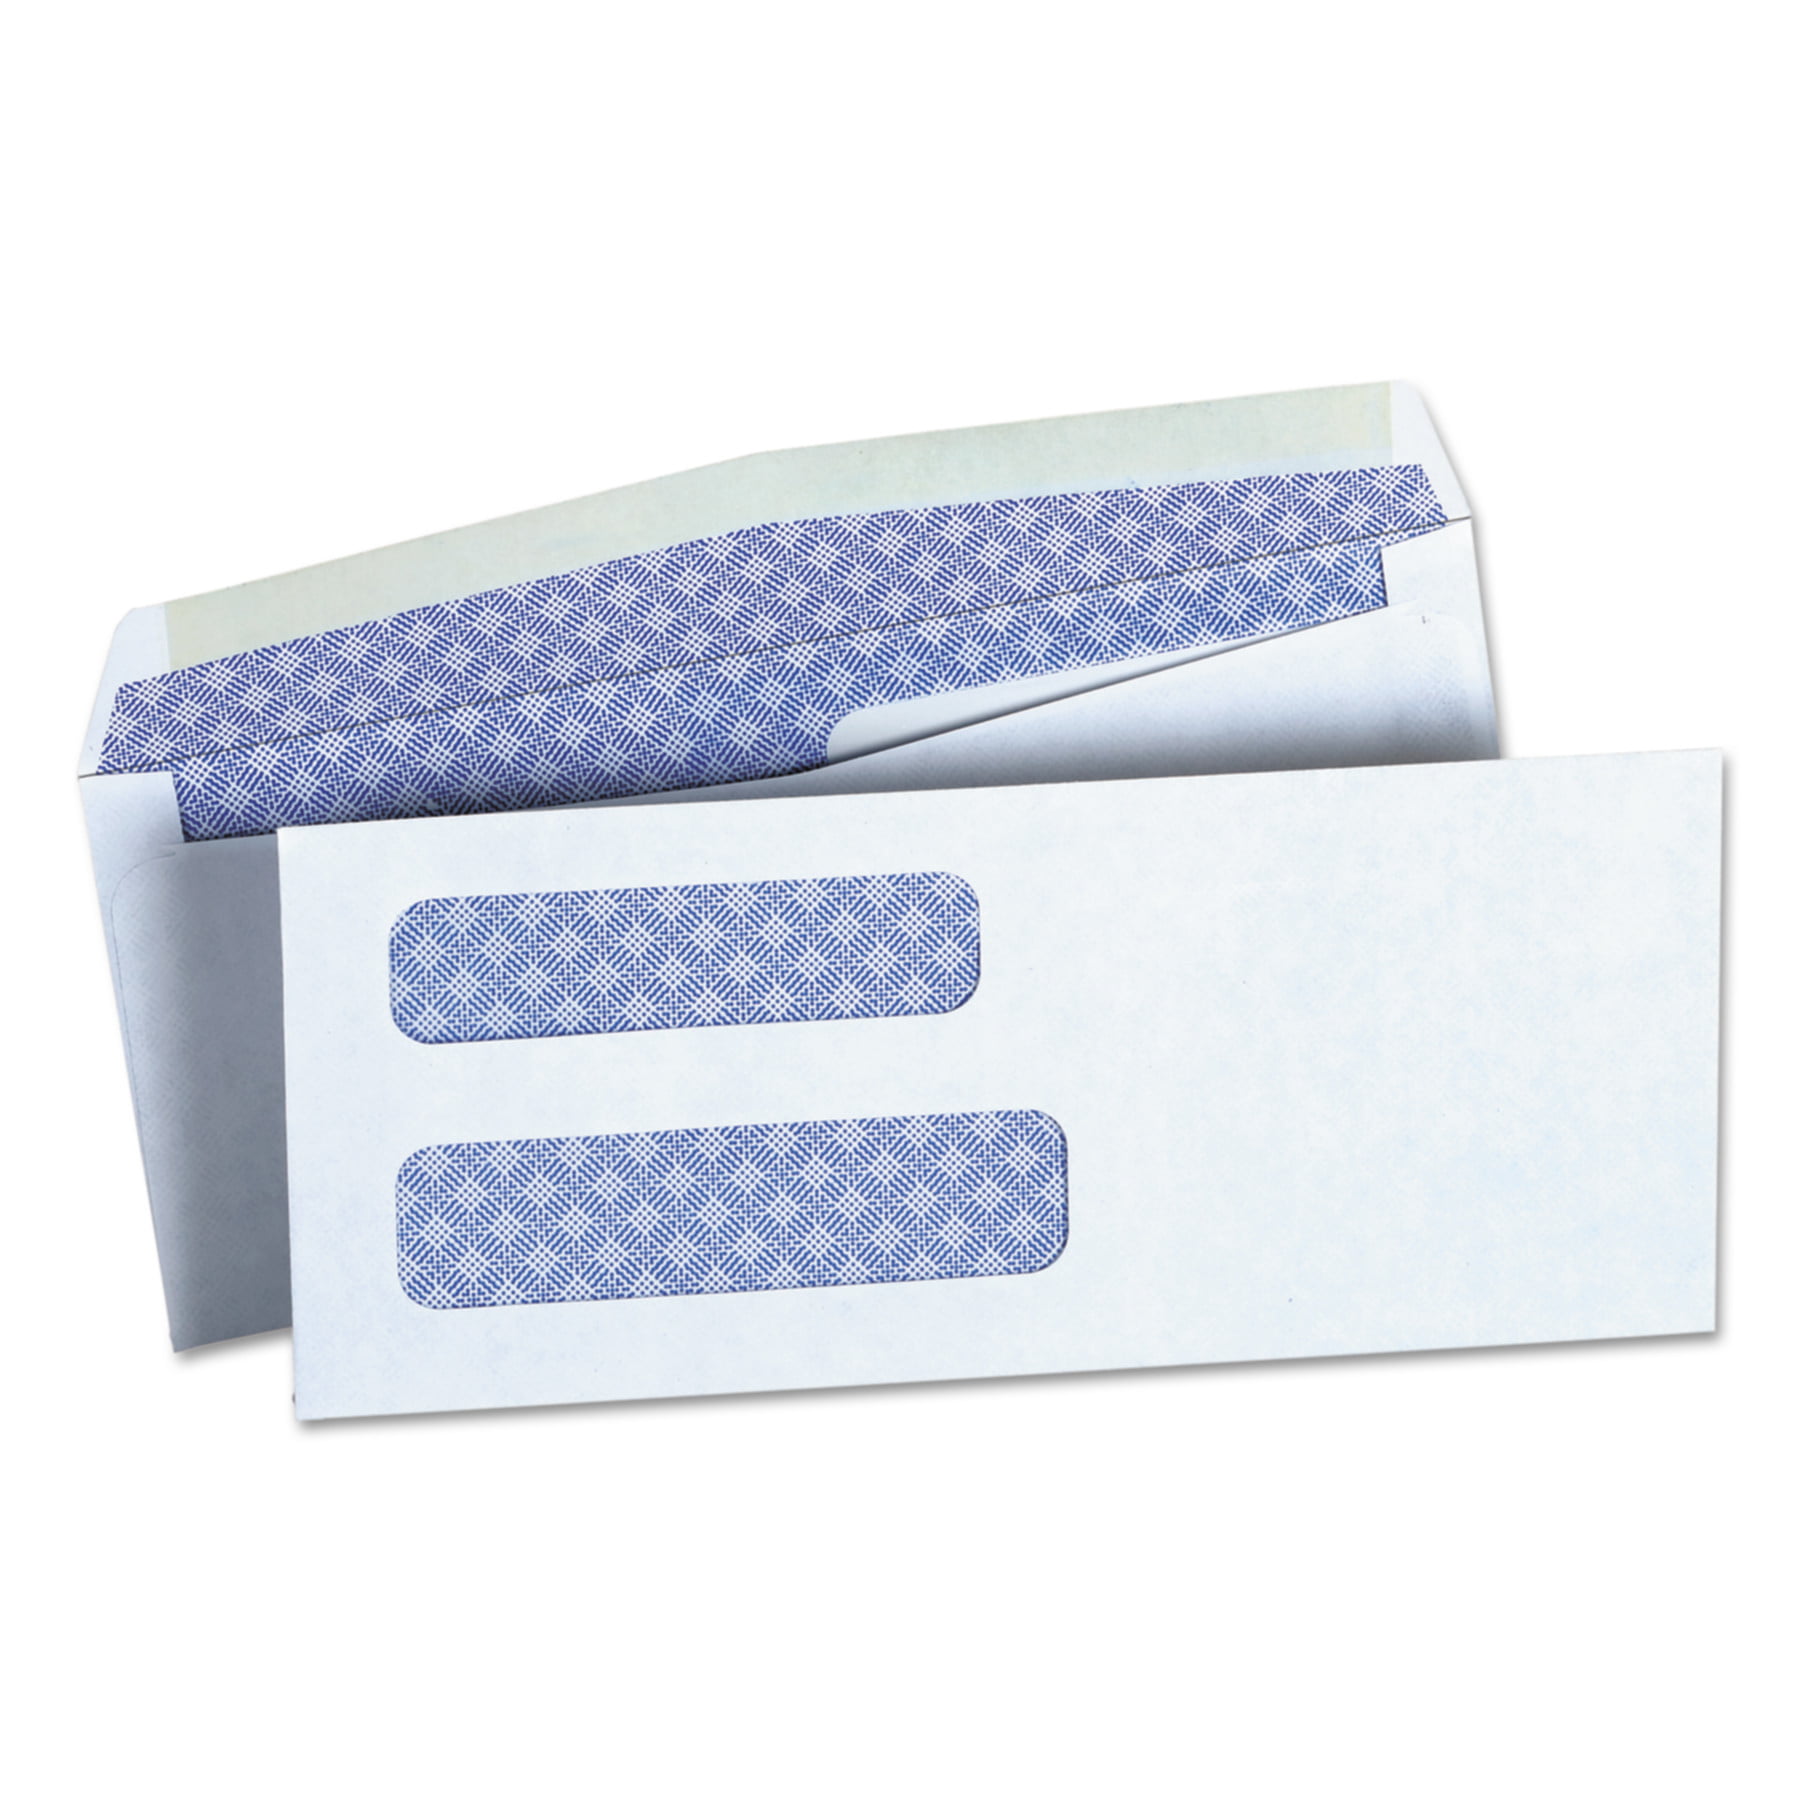 Business / Check Envelopes Double Window Envelopes REDUCED 500-pack New #8 